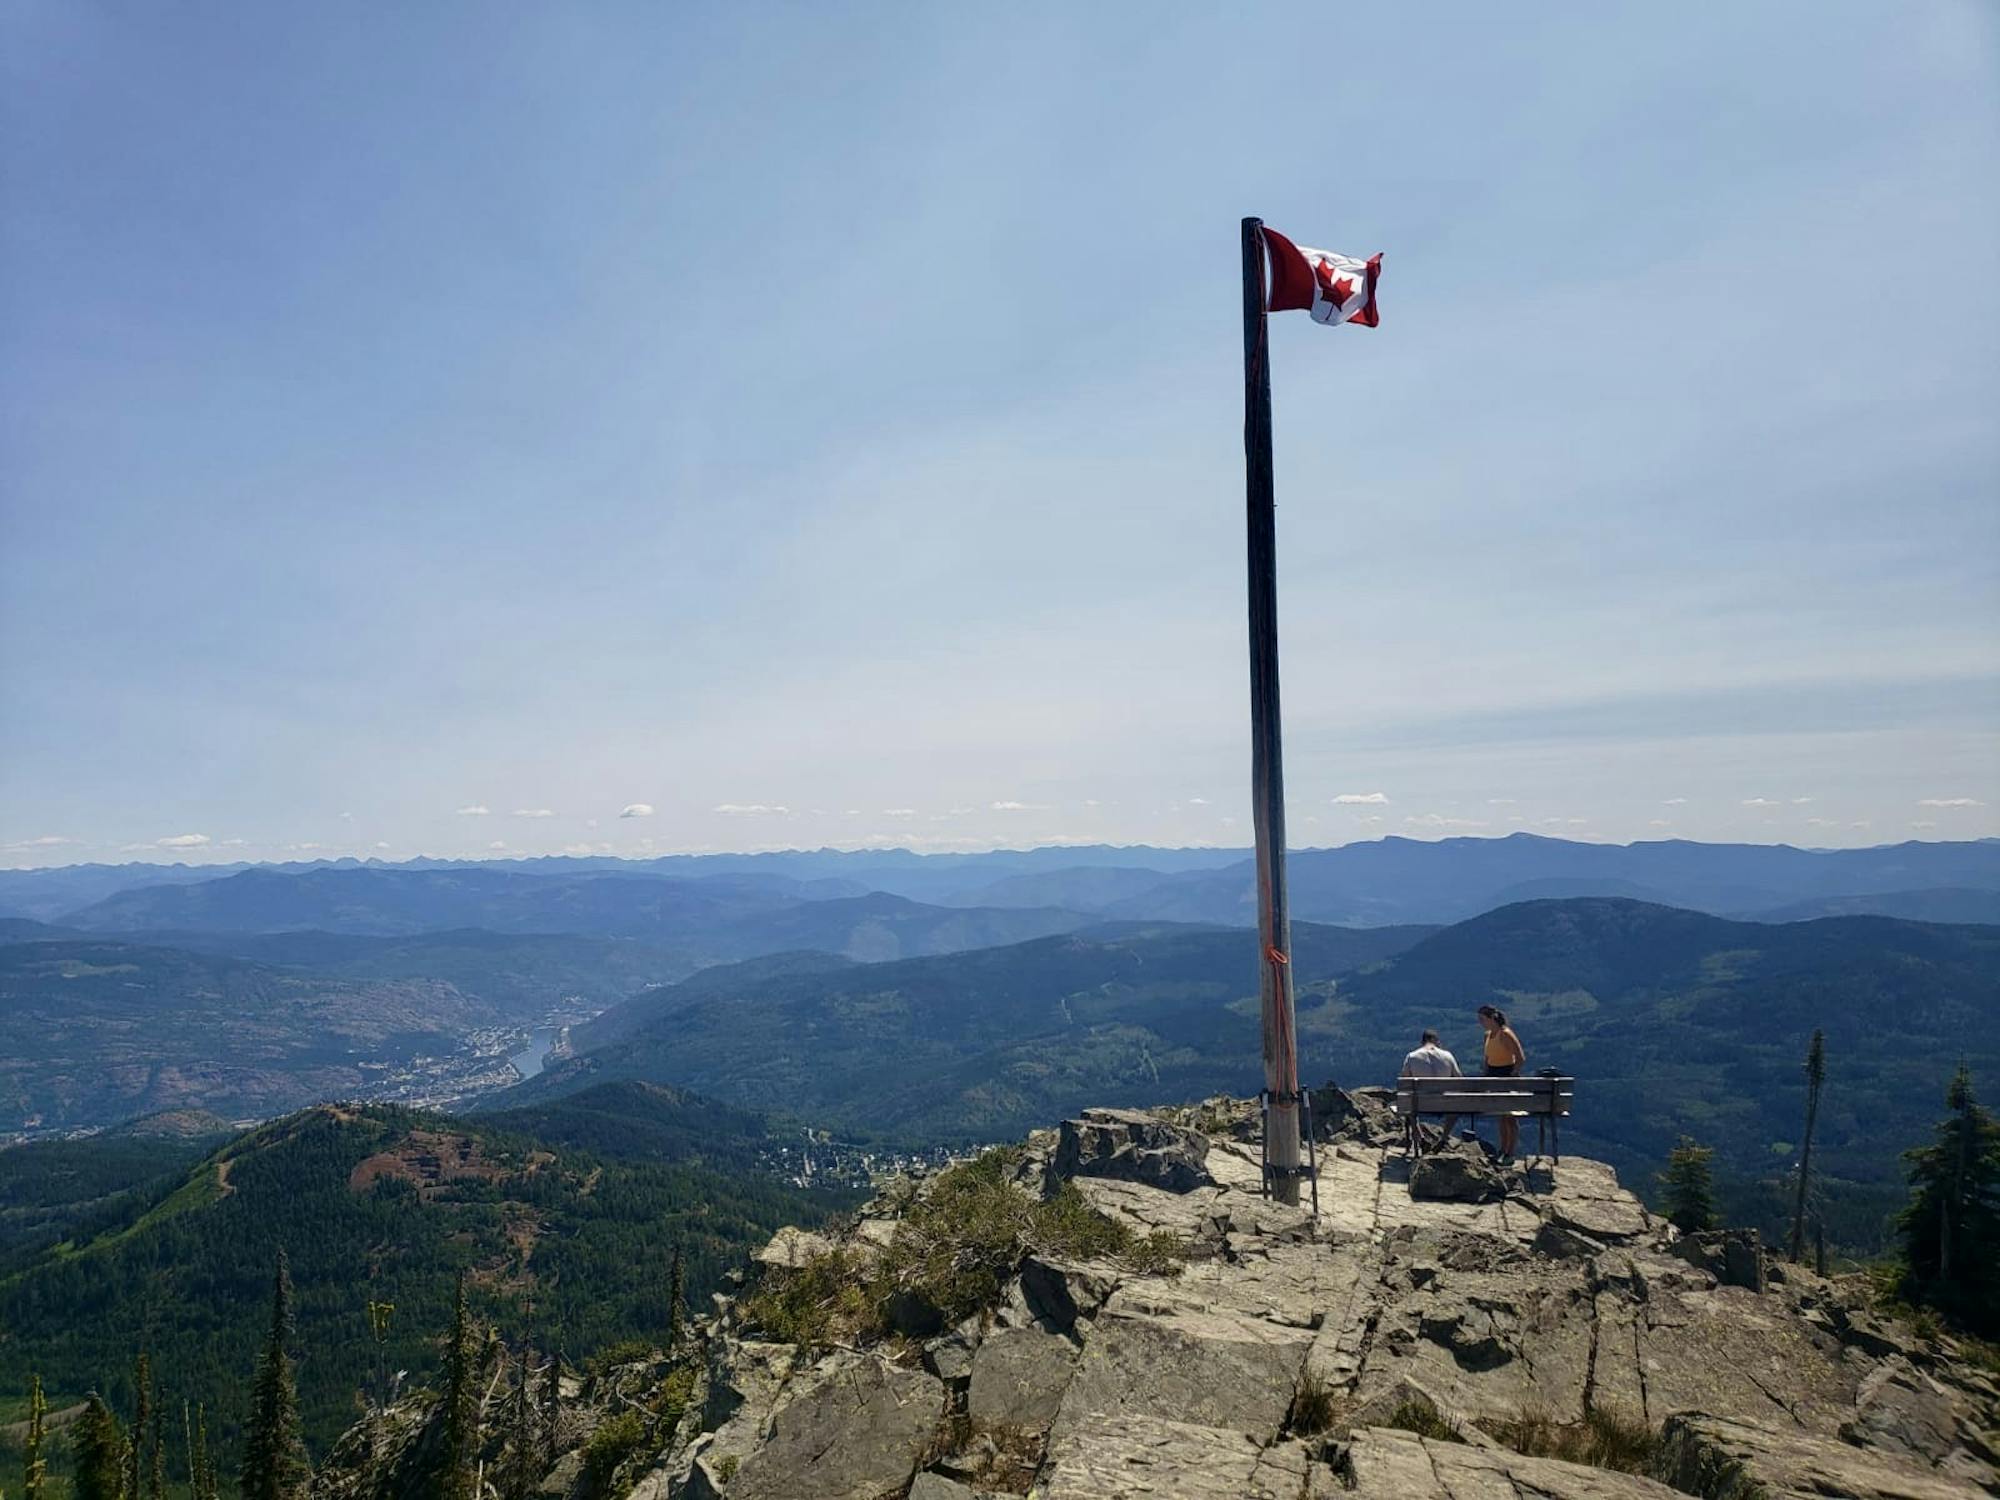 The summit of Mount Roberts